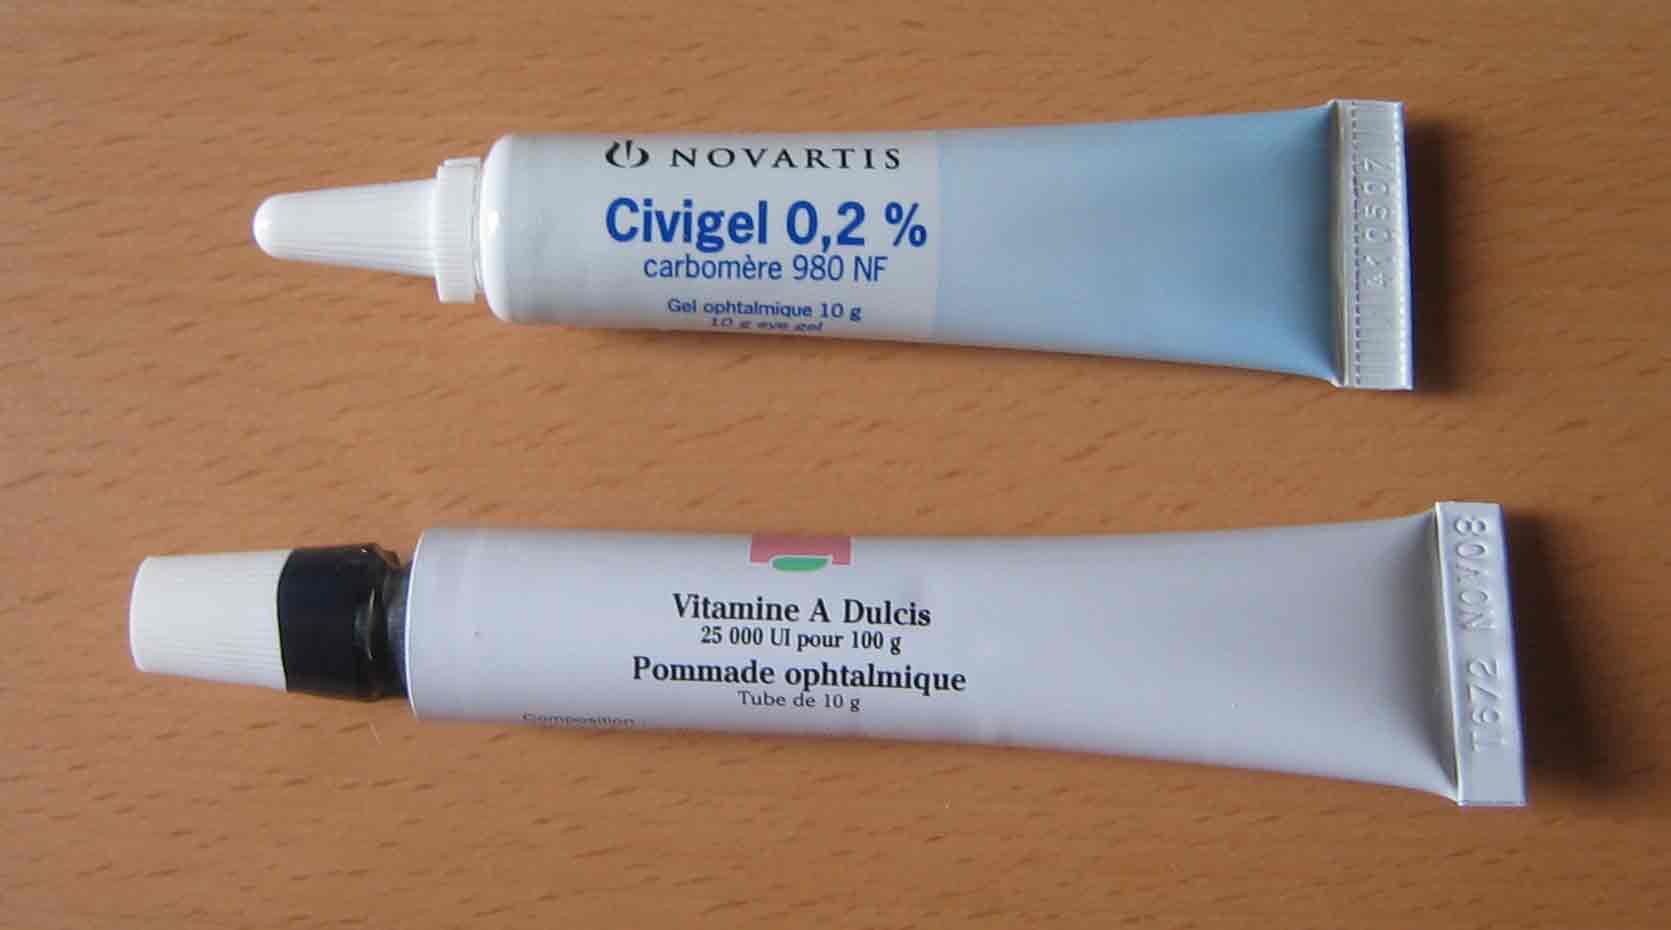 Gels and ointments (preserved and non preserved)